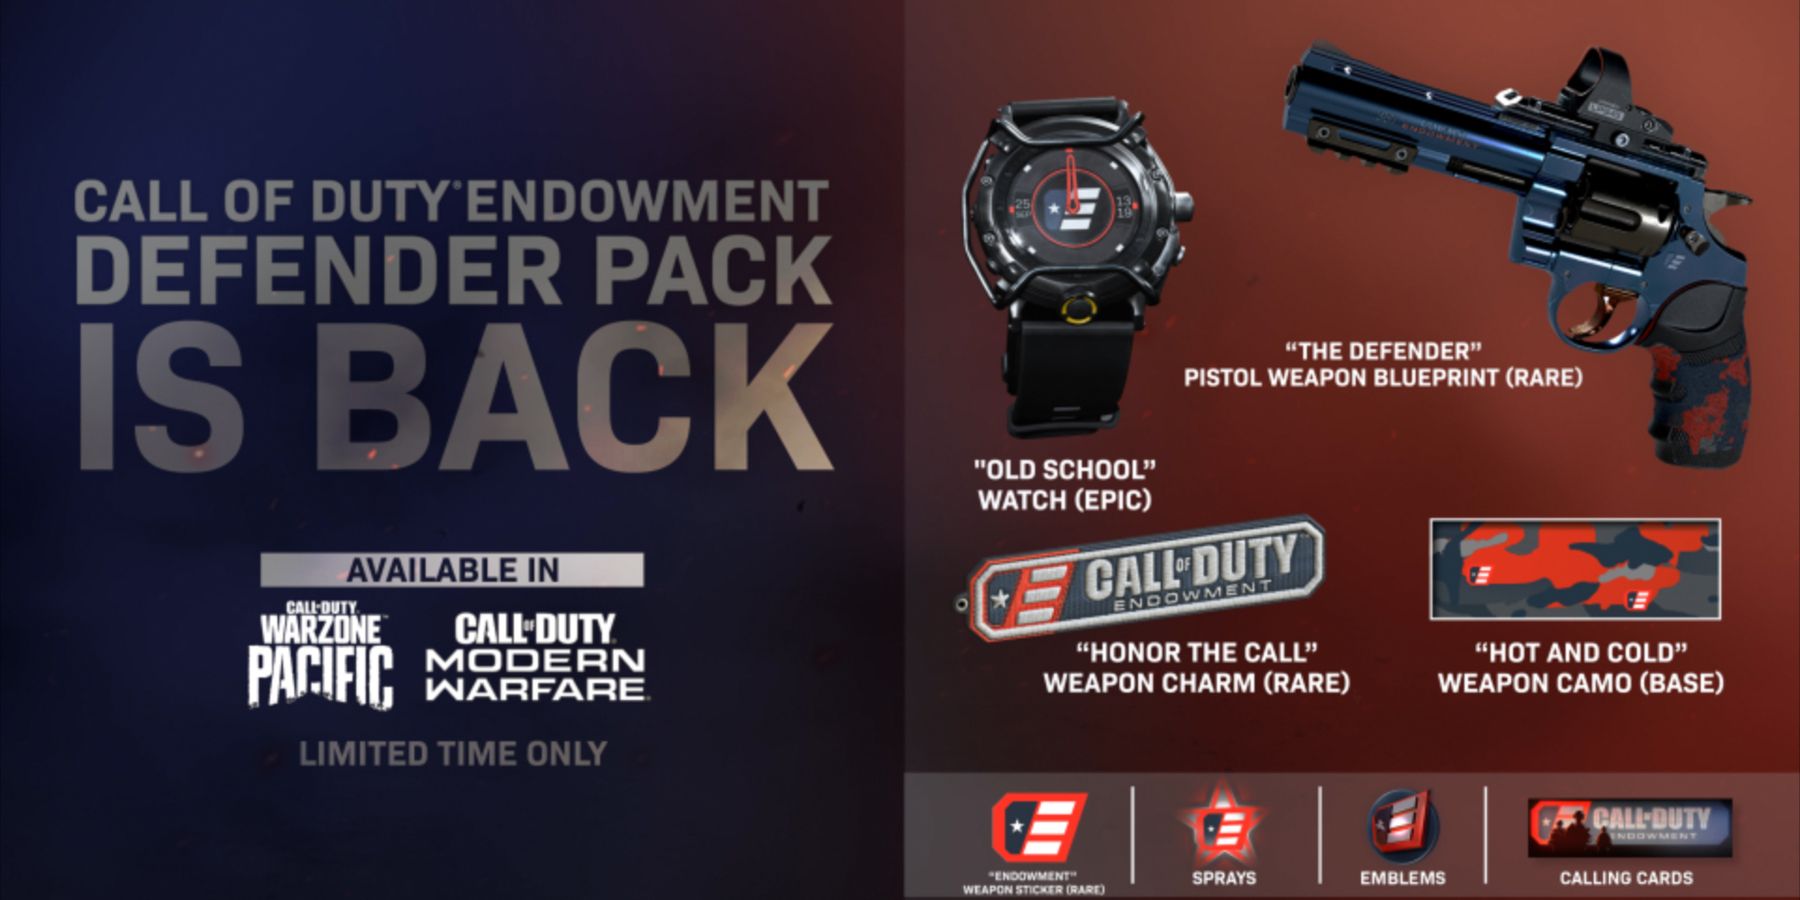 Call of Duty Endowment Defender Pack contents